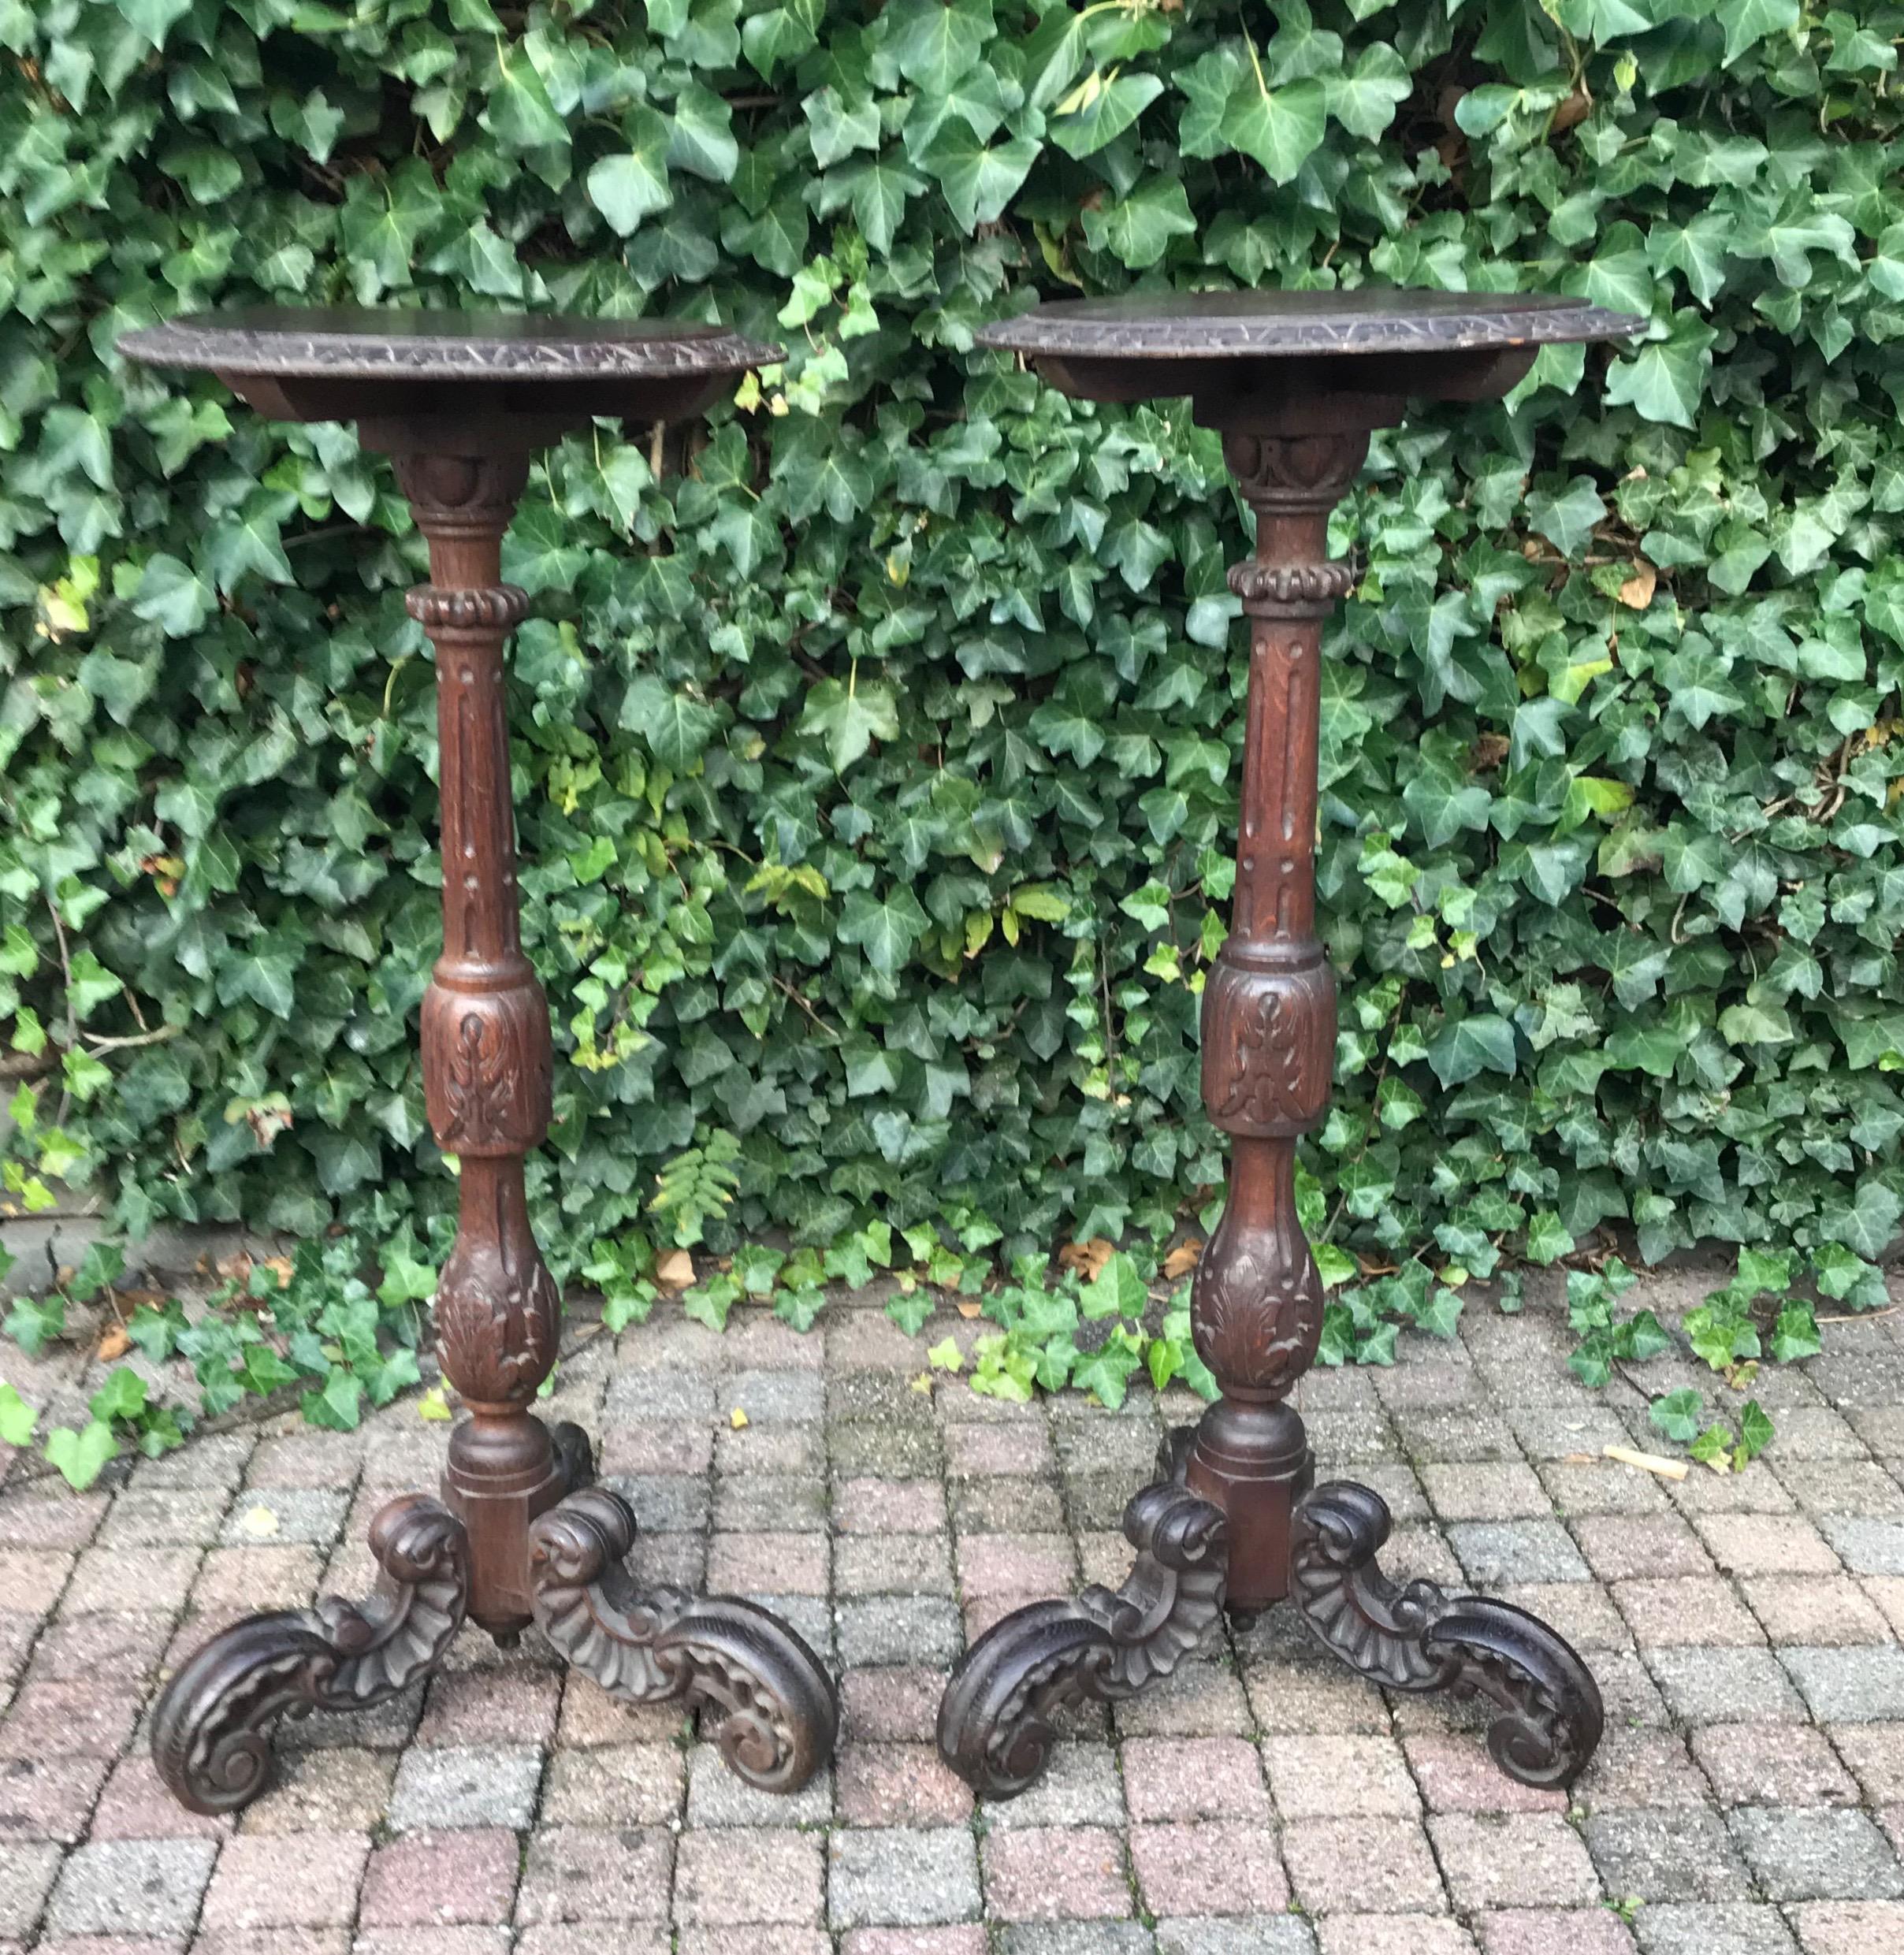 Great looking and matching pair of display tables from circa 1900.

Both these rare and all hand carved tripod tables are as stable as the day they were made. The solid oakwood with its rich patina is in very good condition and these decorative